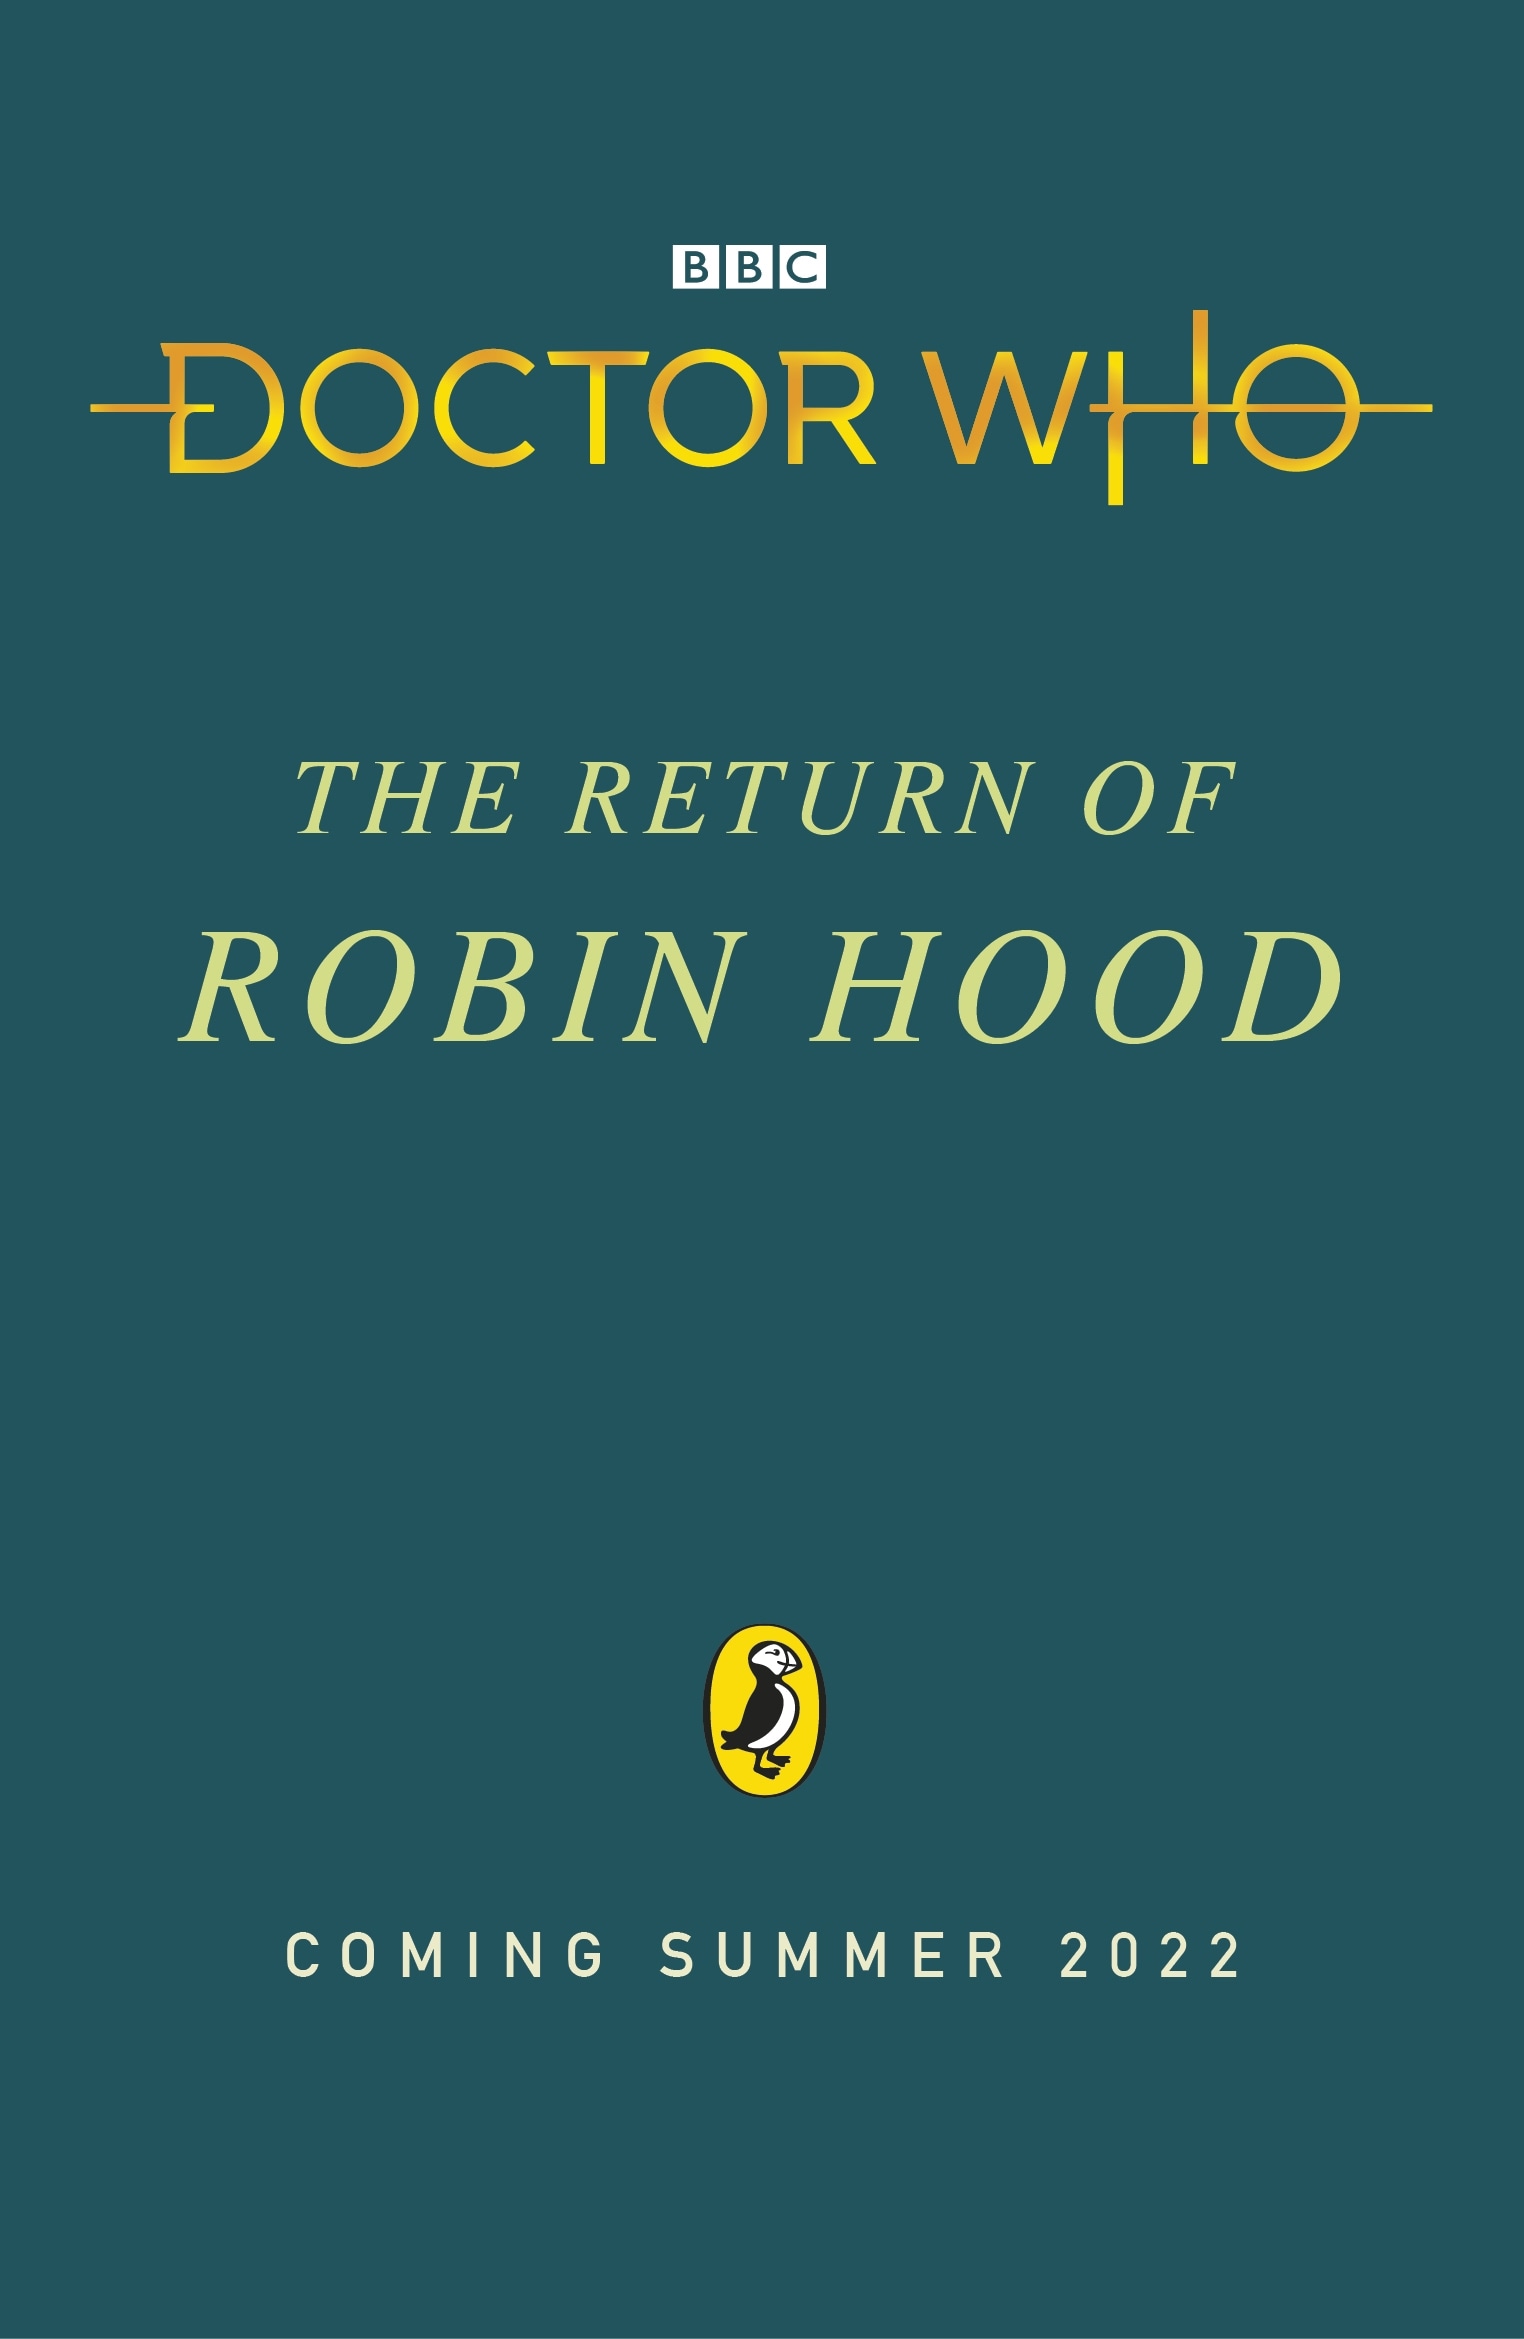 Book “Doctor Who: The Return of Robin Hood” by Paul Magrs, Doctor Who — July 21, 2022